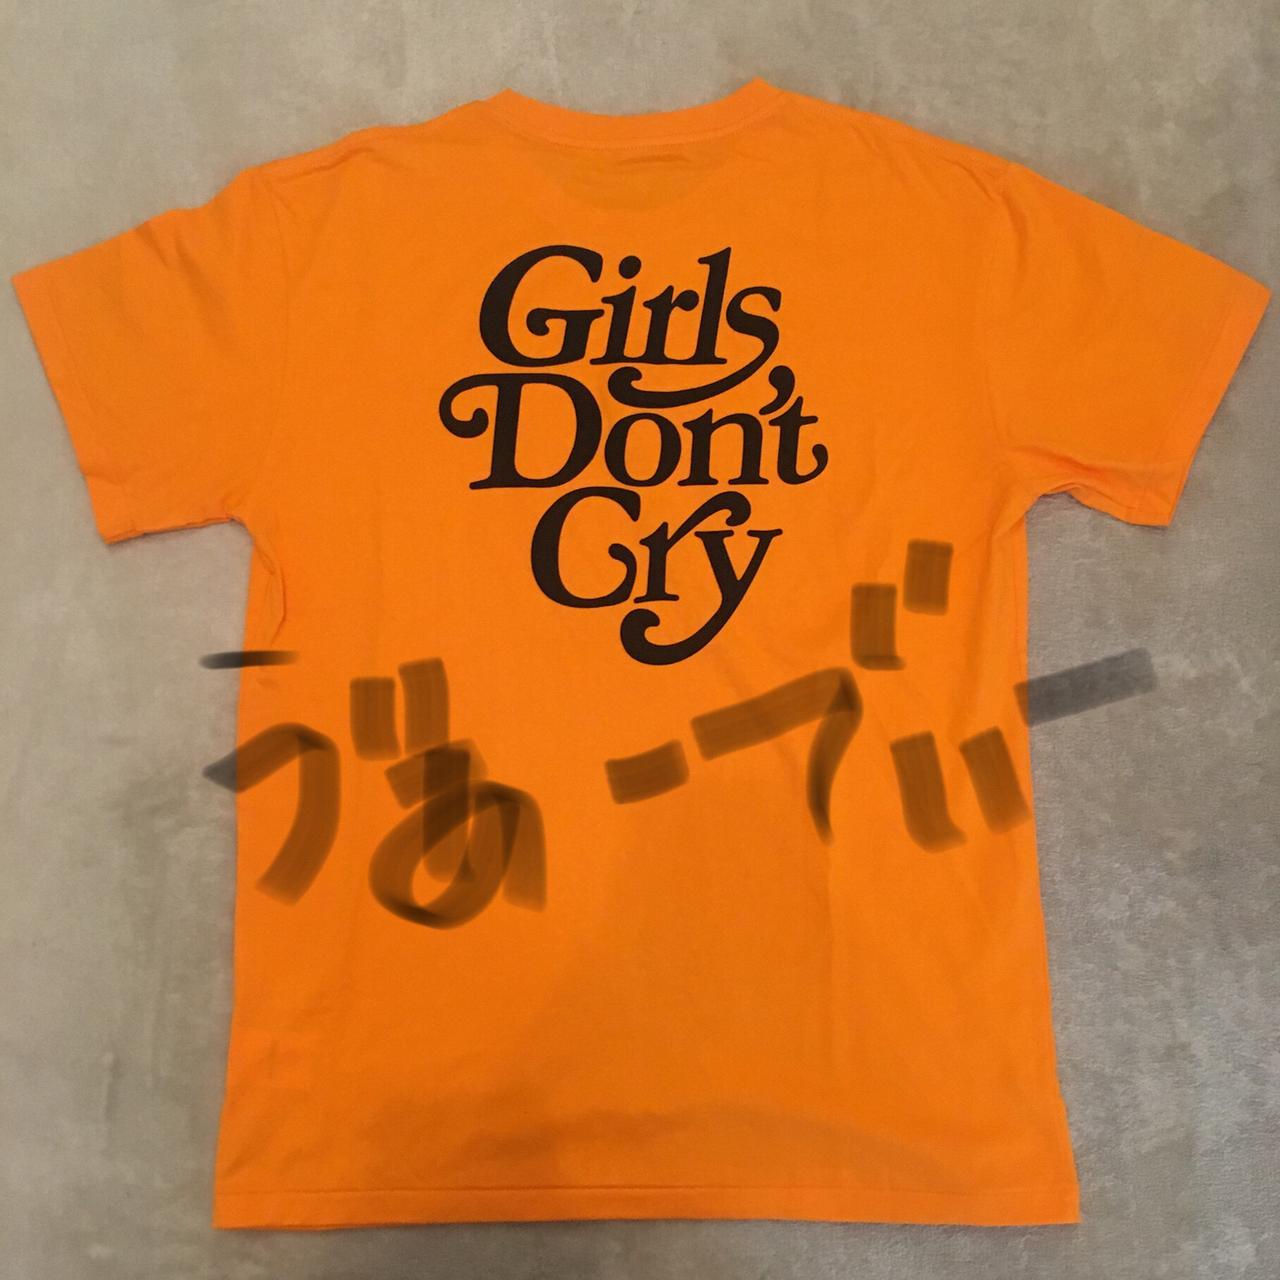 Girls Don't Cry x Readymade Tee size L Color... - Depop